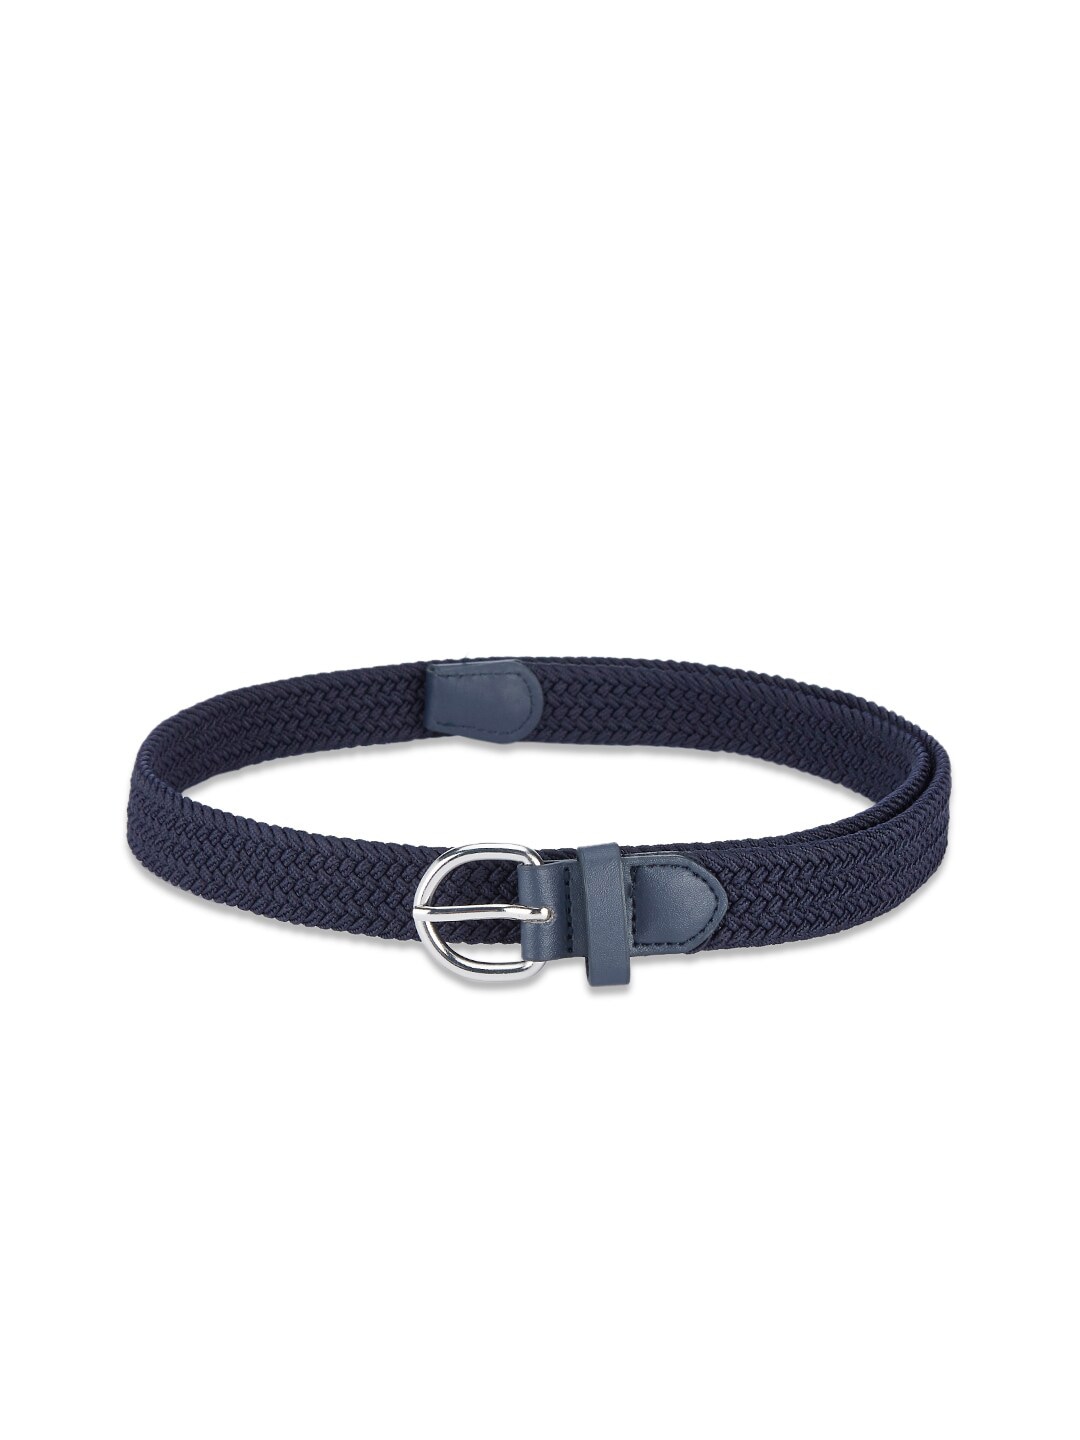 Forever Glam by Pantaloons Women Navy Blue PU Belt Price in India